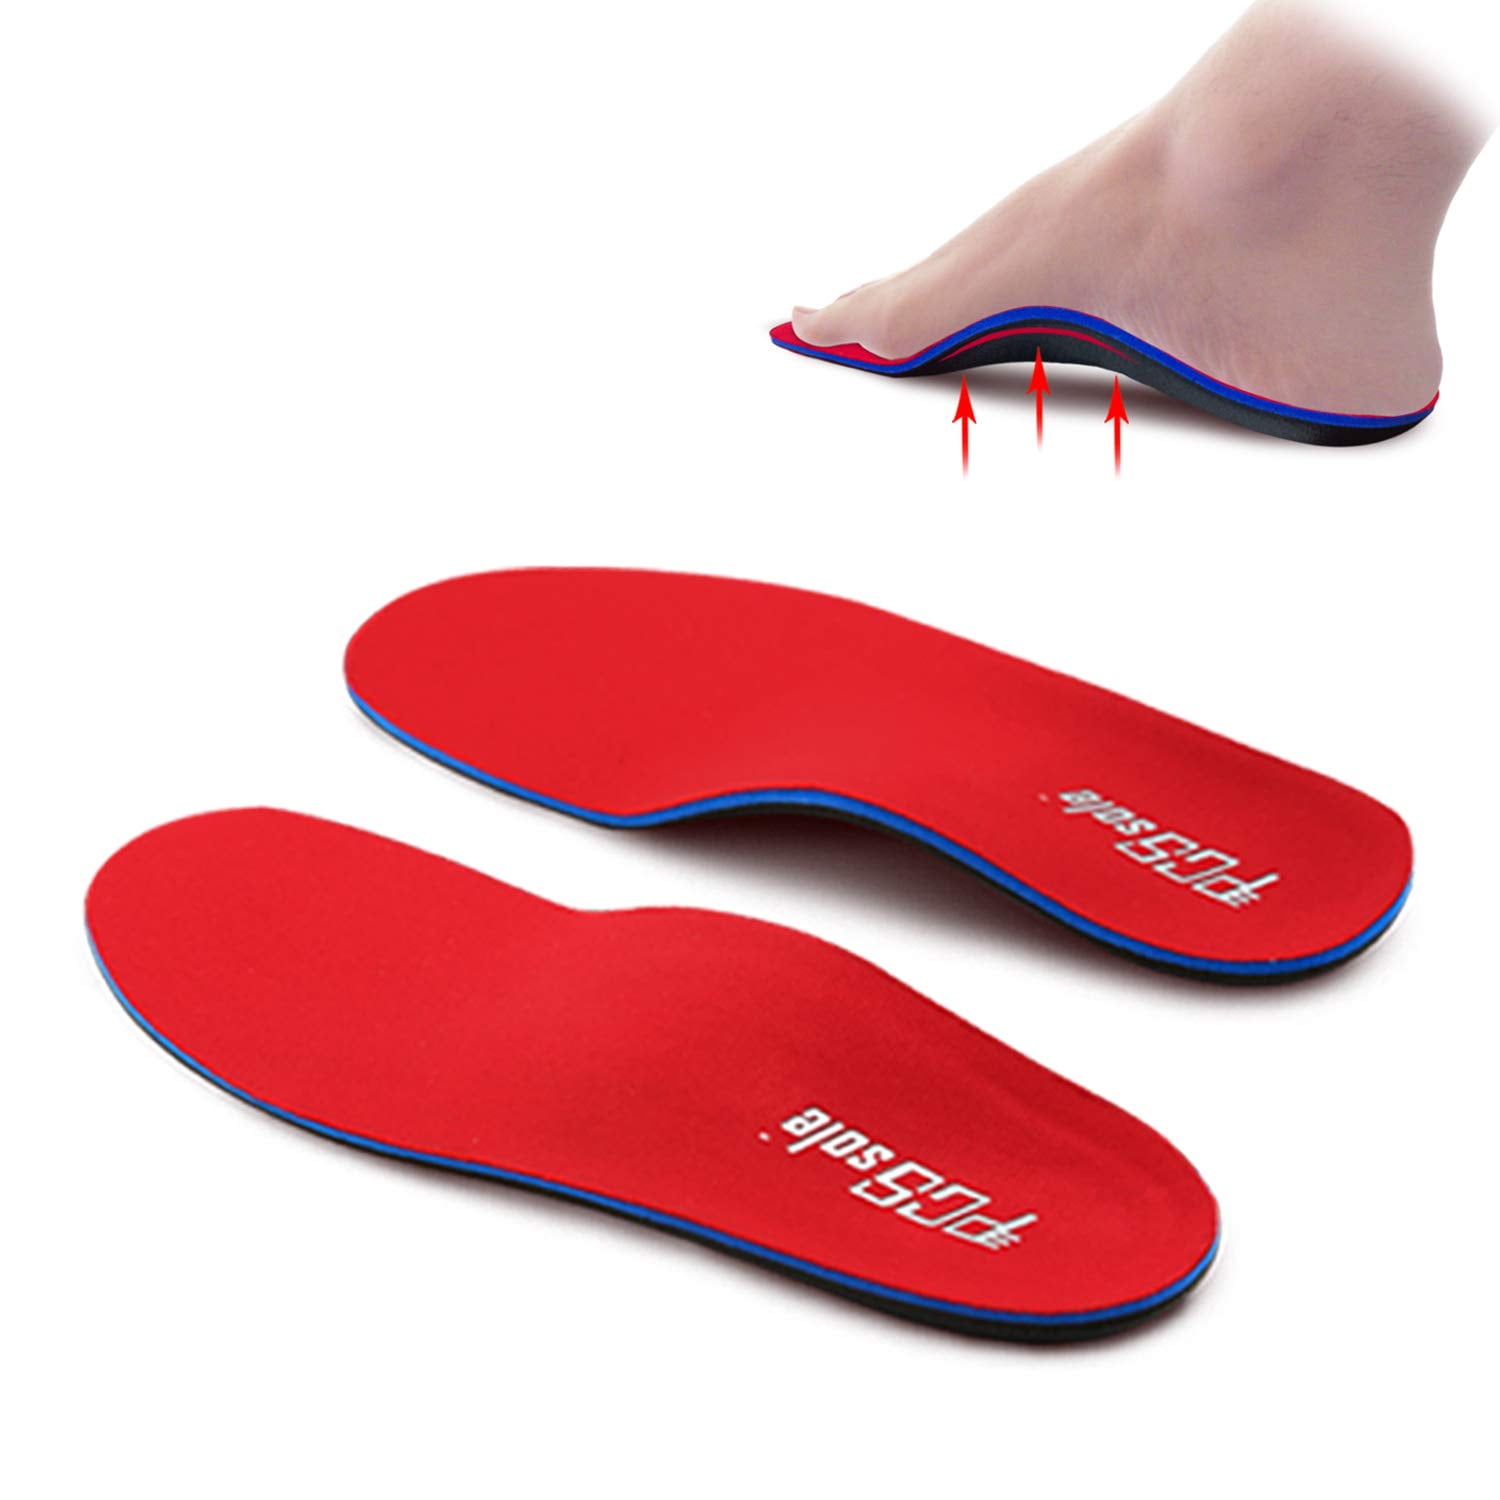 ERGOfoot Sports Gel Orthotic Insoles For Plantar Fasciitis,Arch Support and Foot Pain Relief 